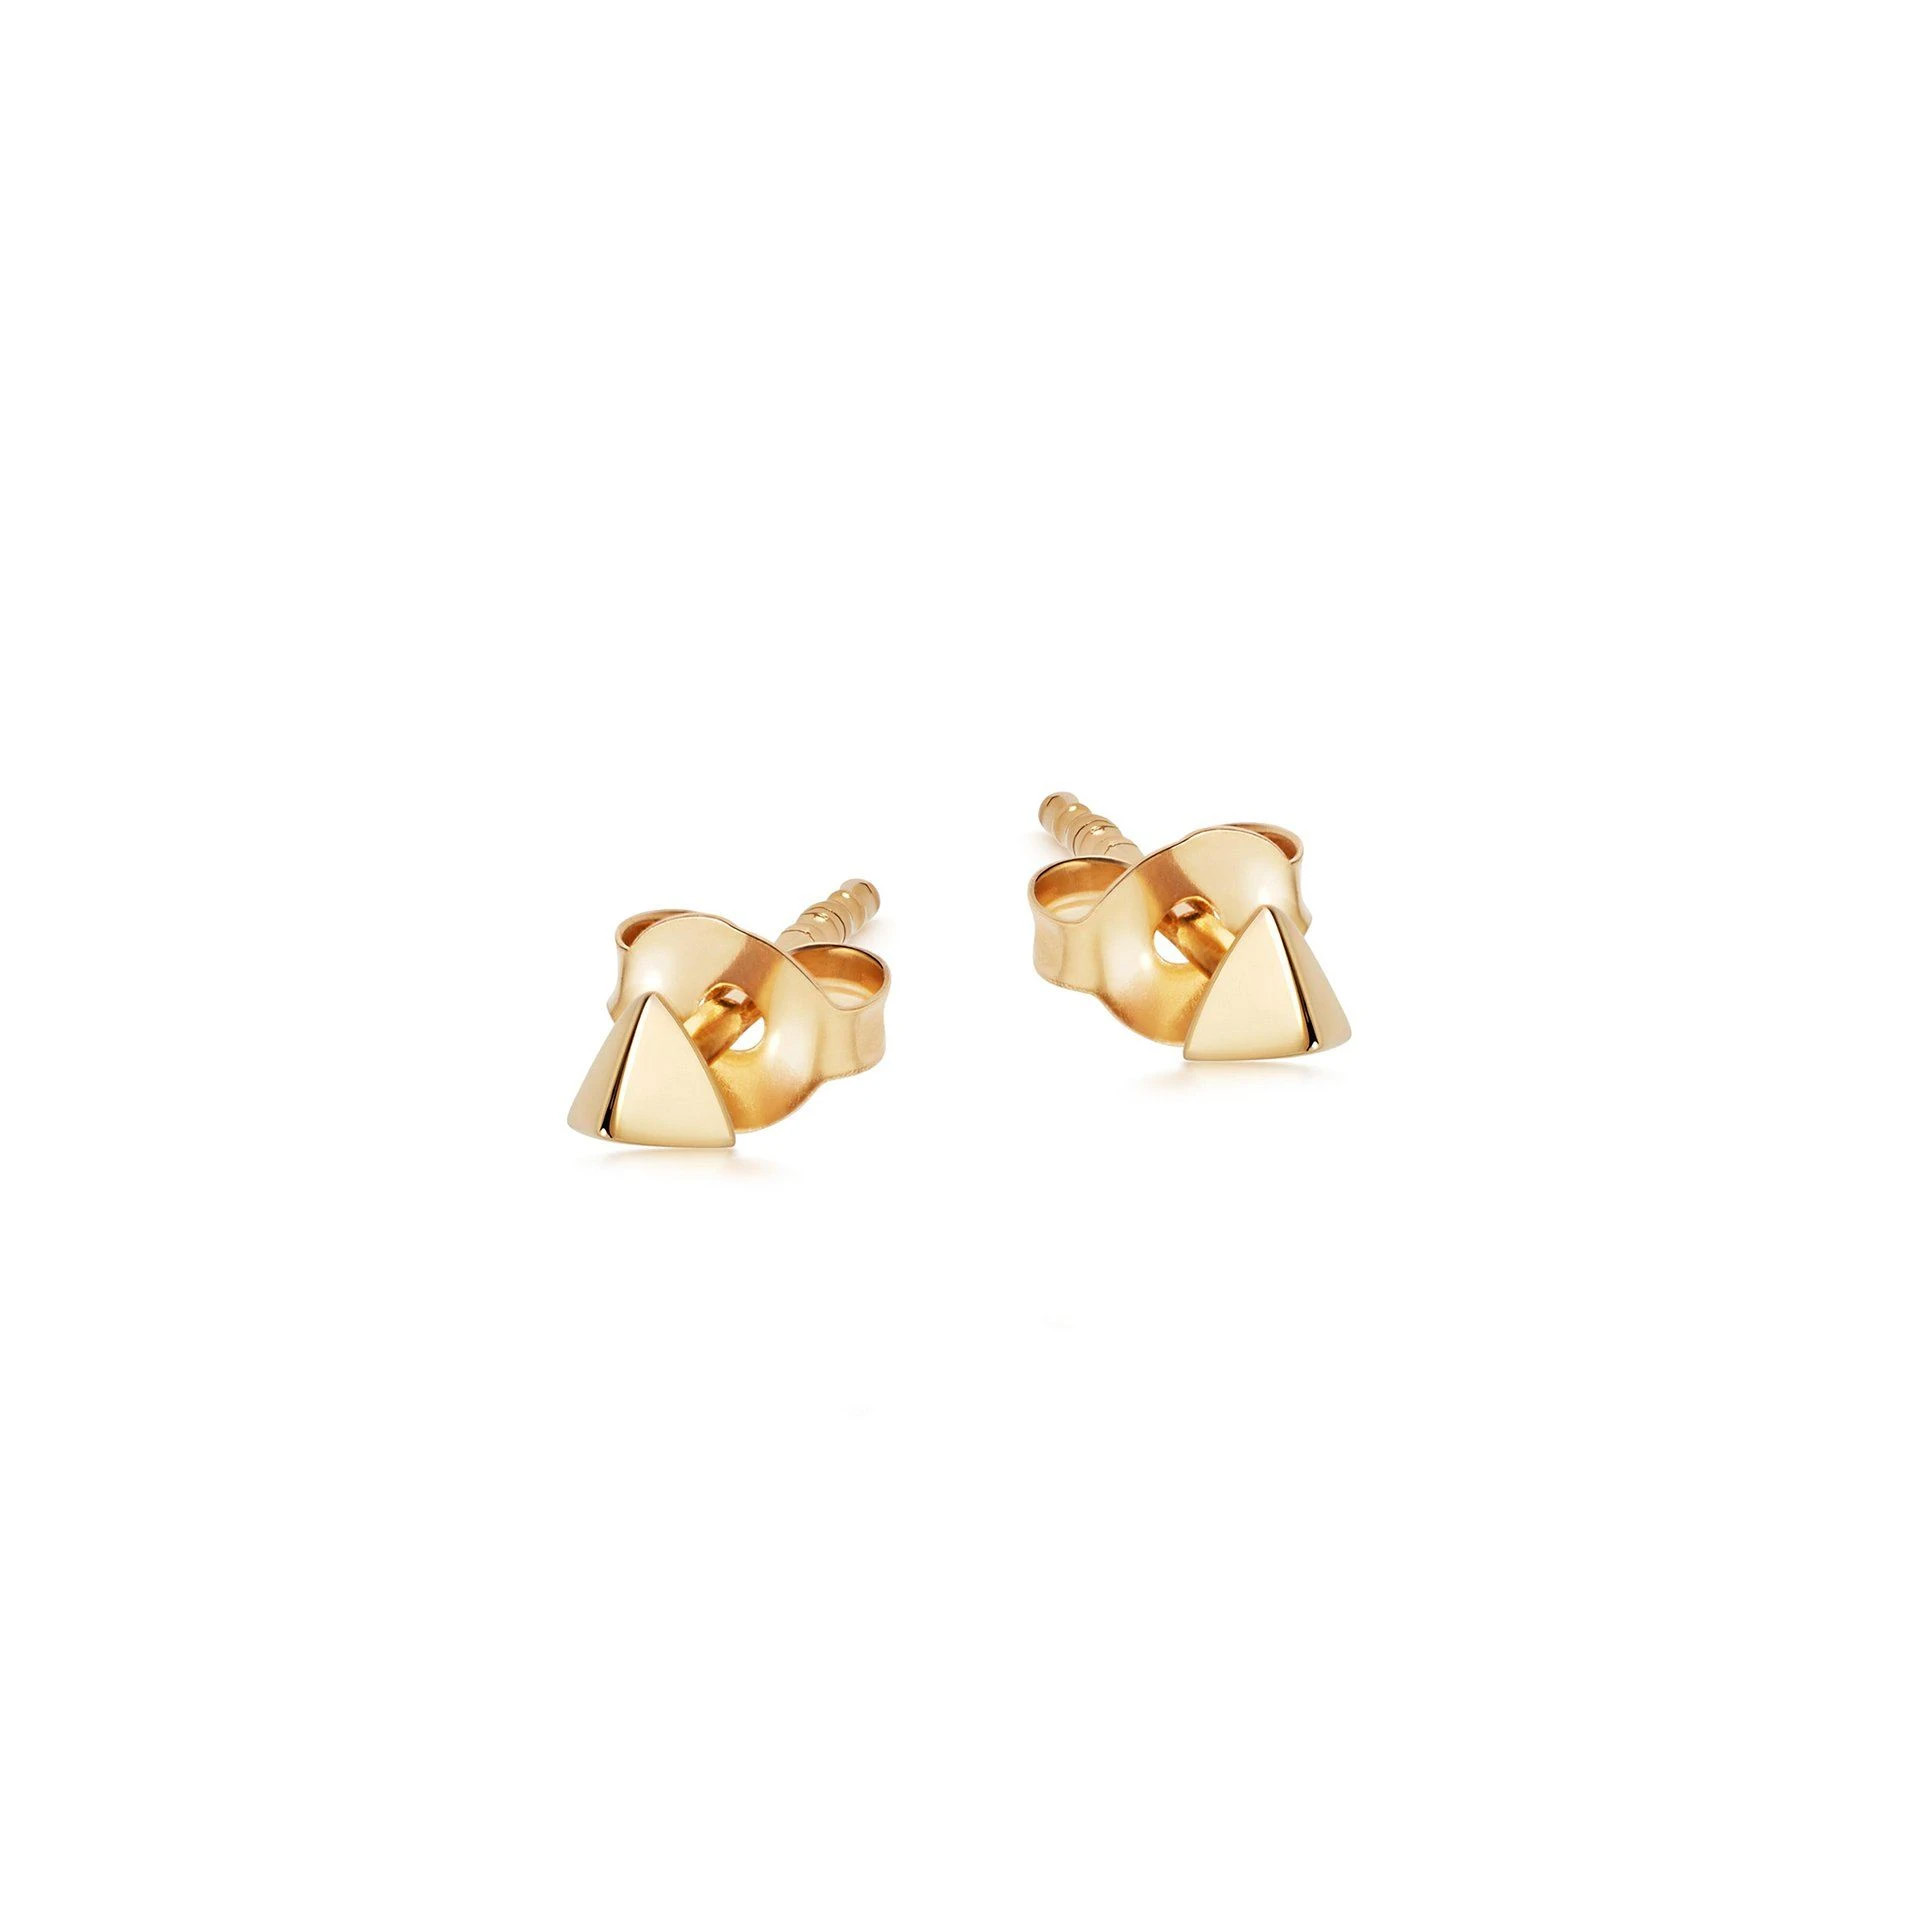 Wholesale OEM/ODM Jewelry OEM design pyramid-shaped earrings studs in 18ct gold vermeil on sterling silver